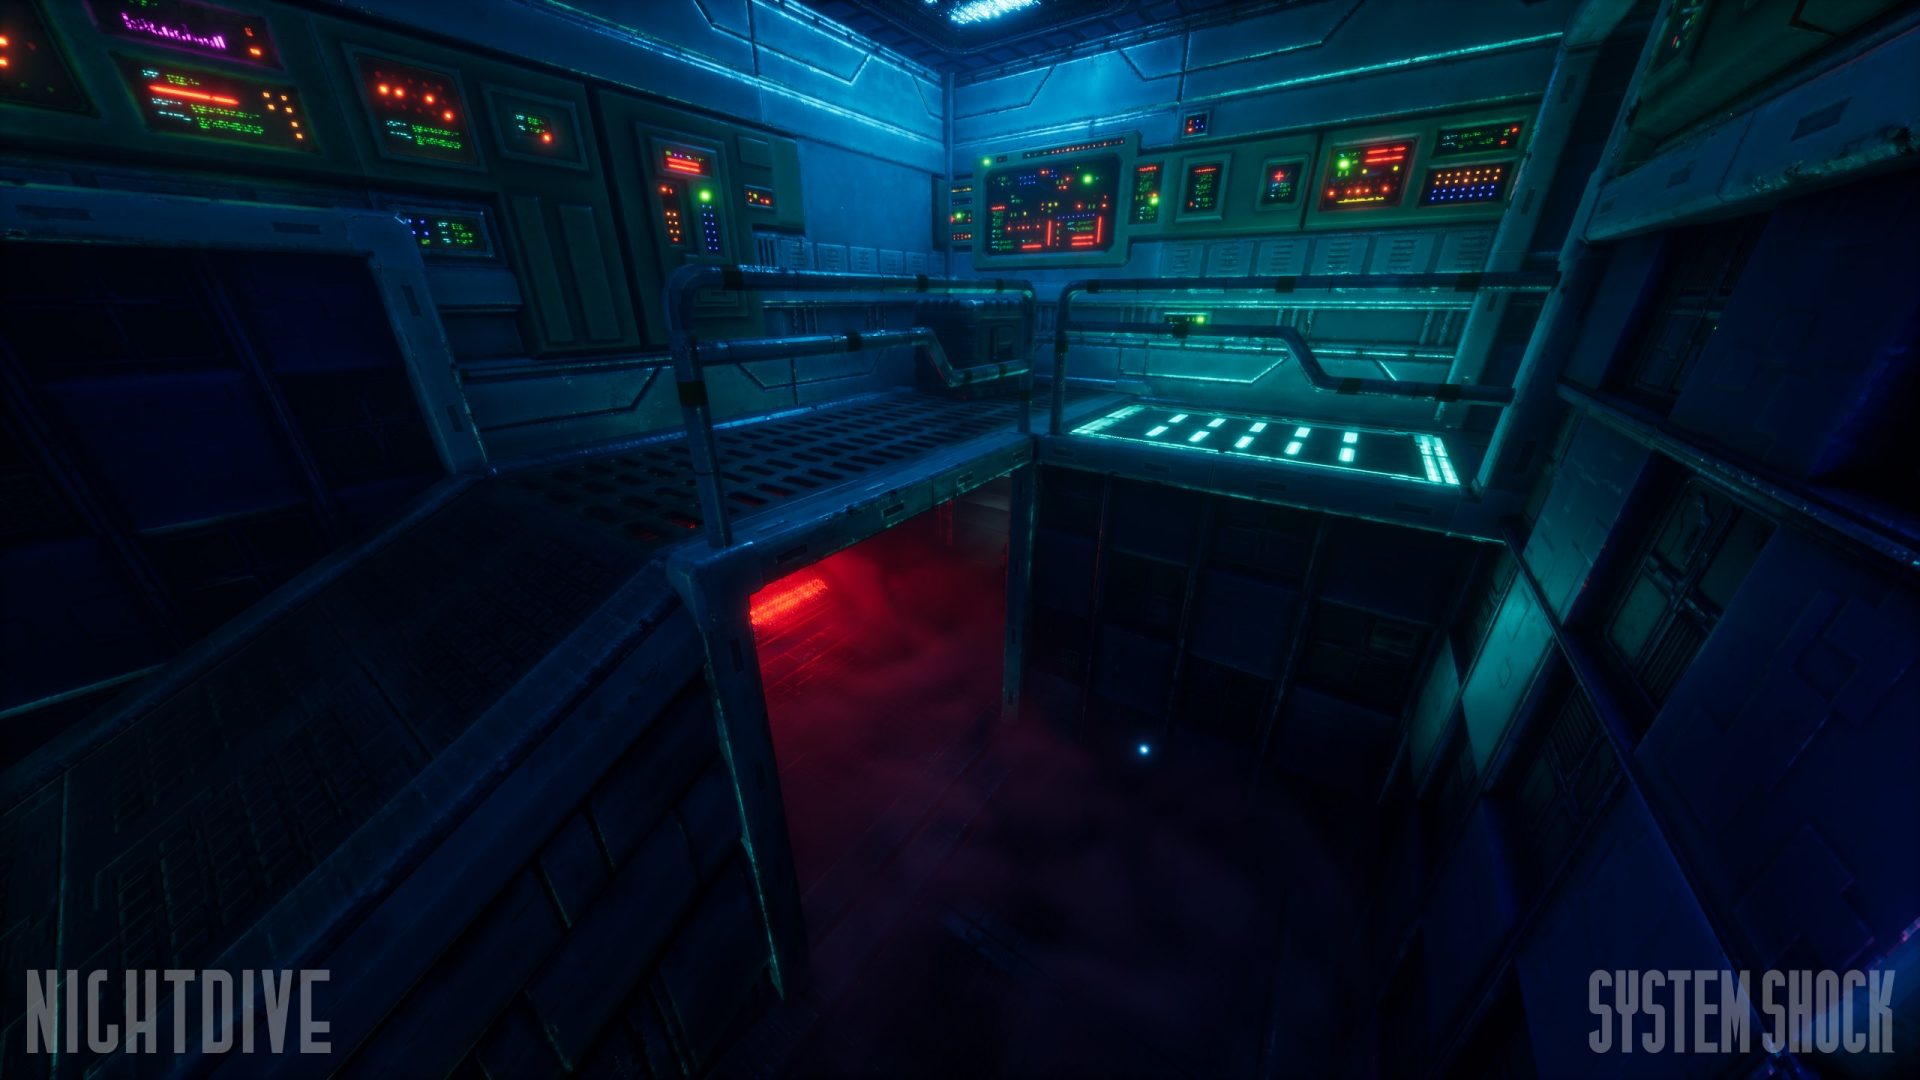 system shock release date 2018